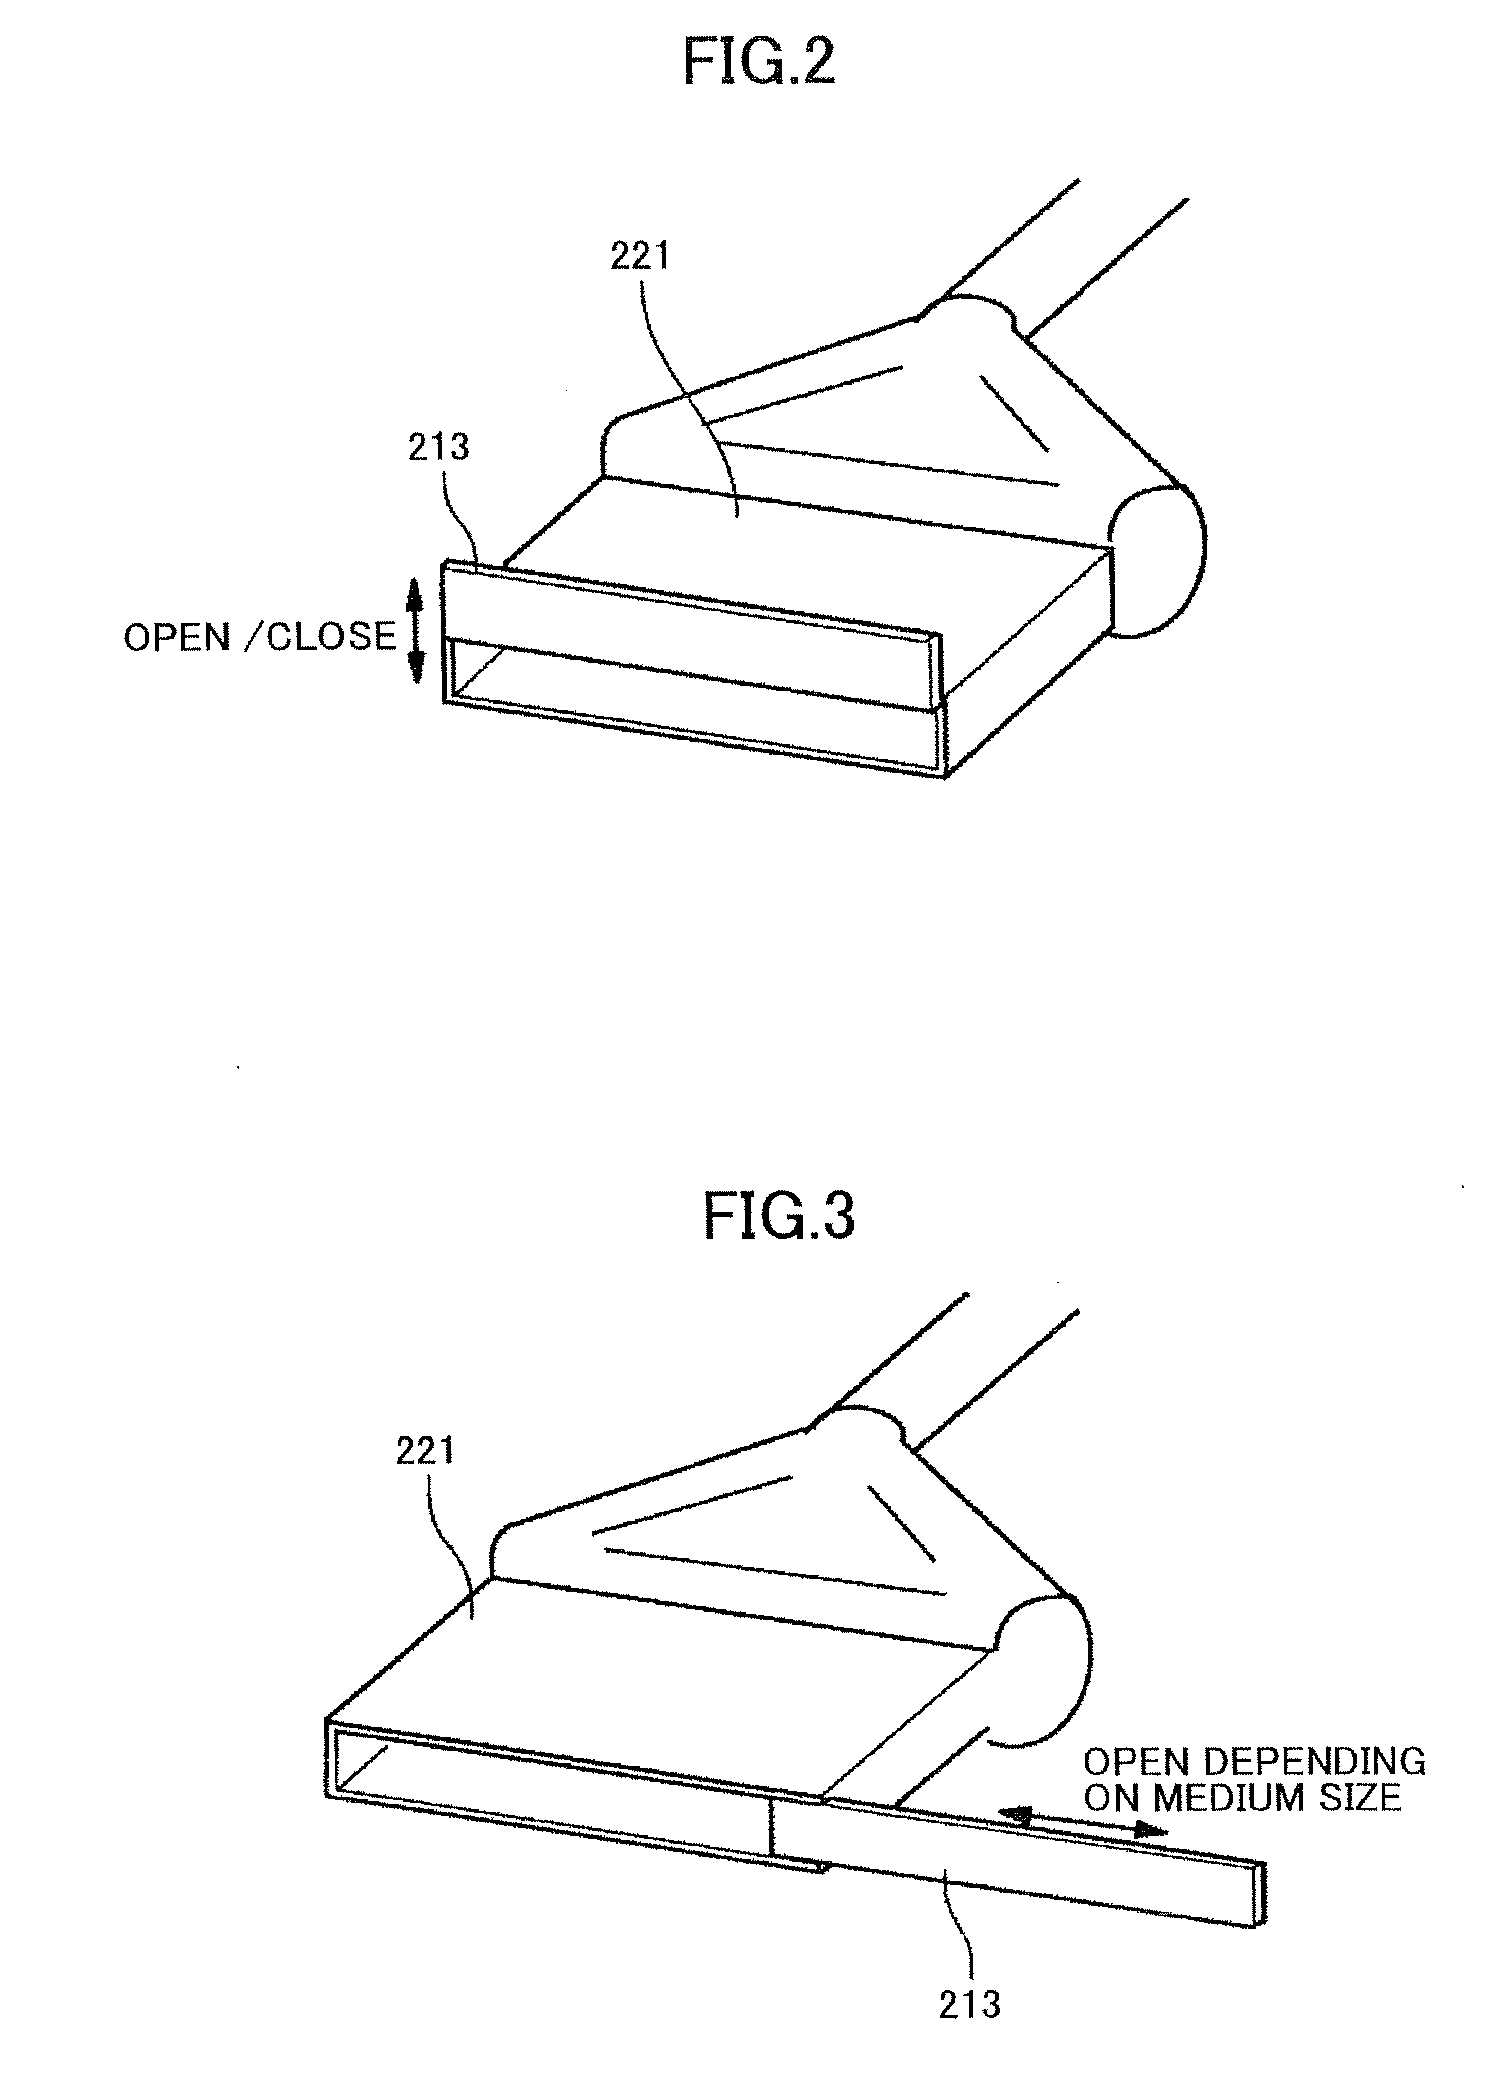 Image forming apparatus and apparatus for coating foam on coating target member